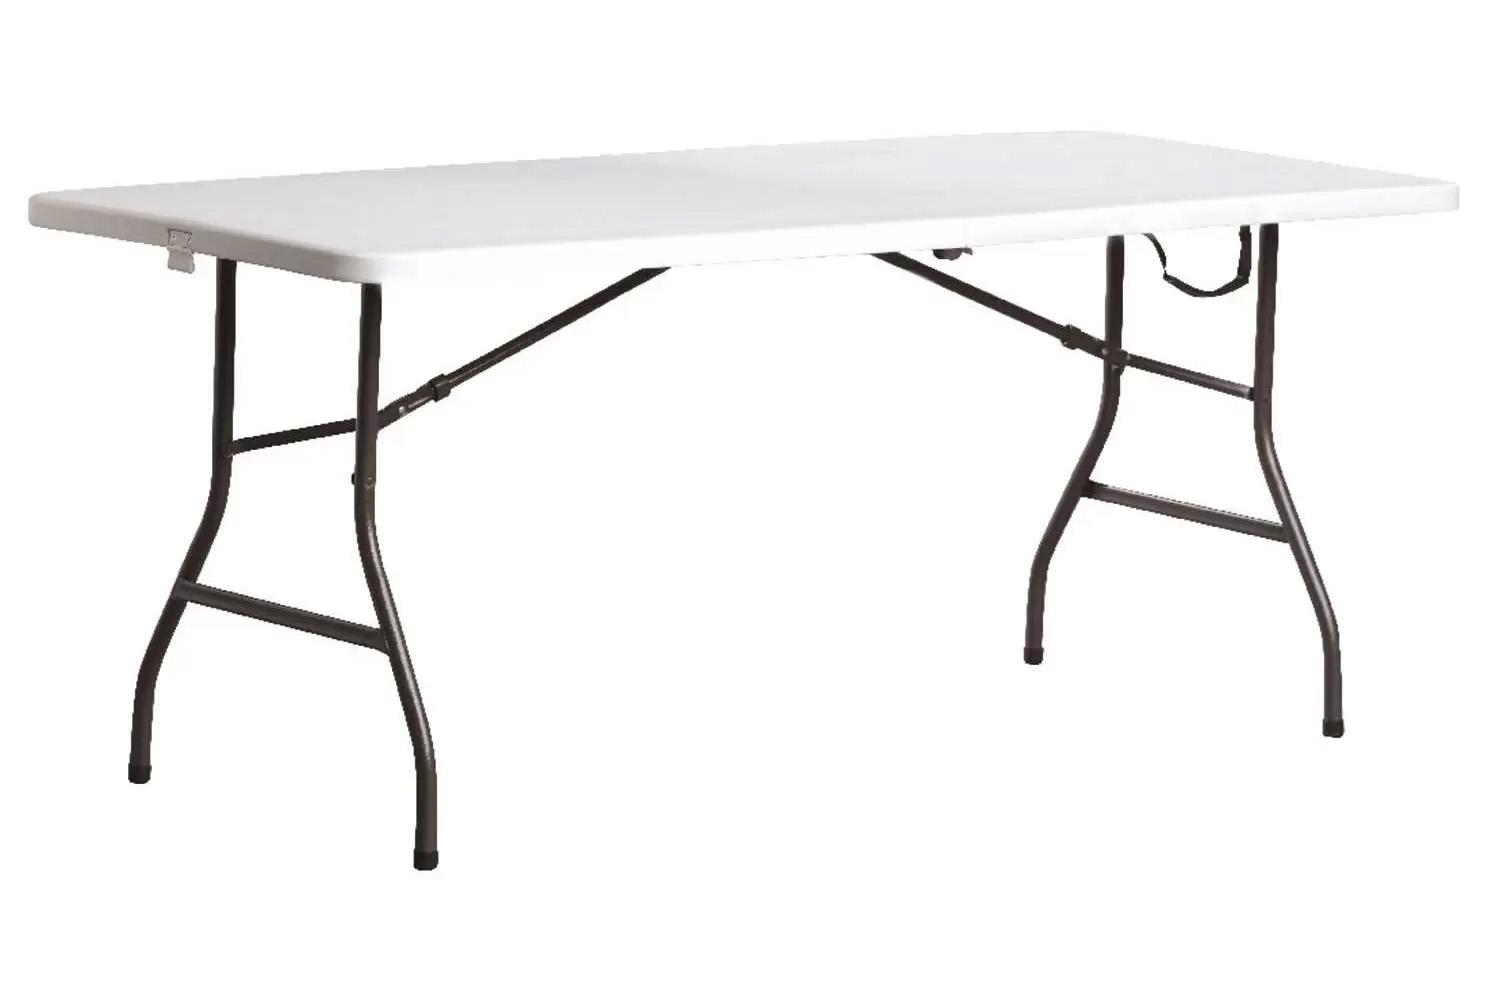 Living Accents Fold-in-Half Table for $29.99